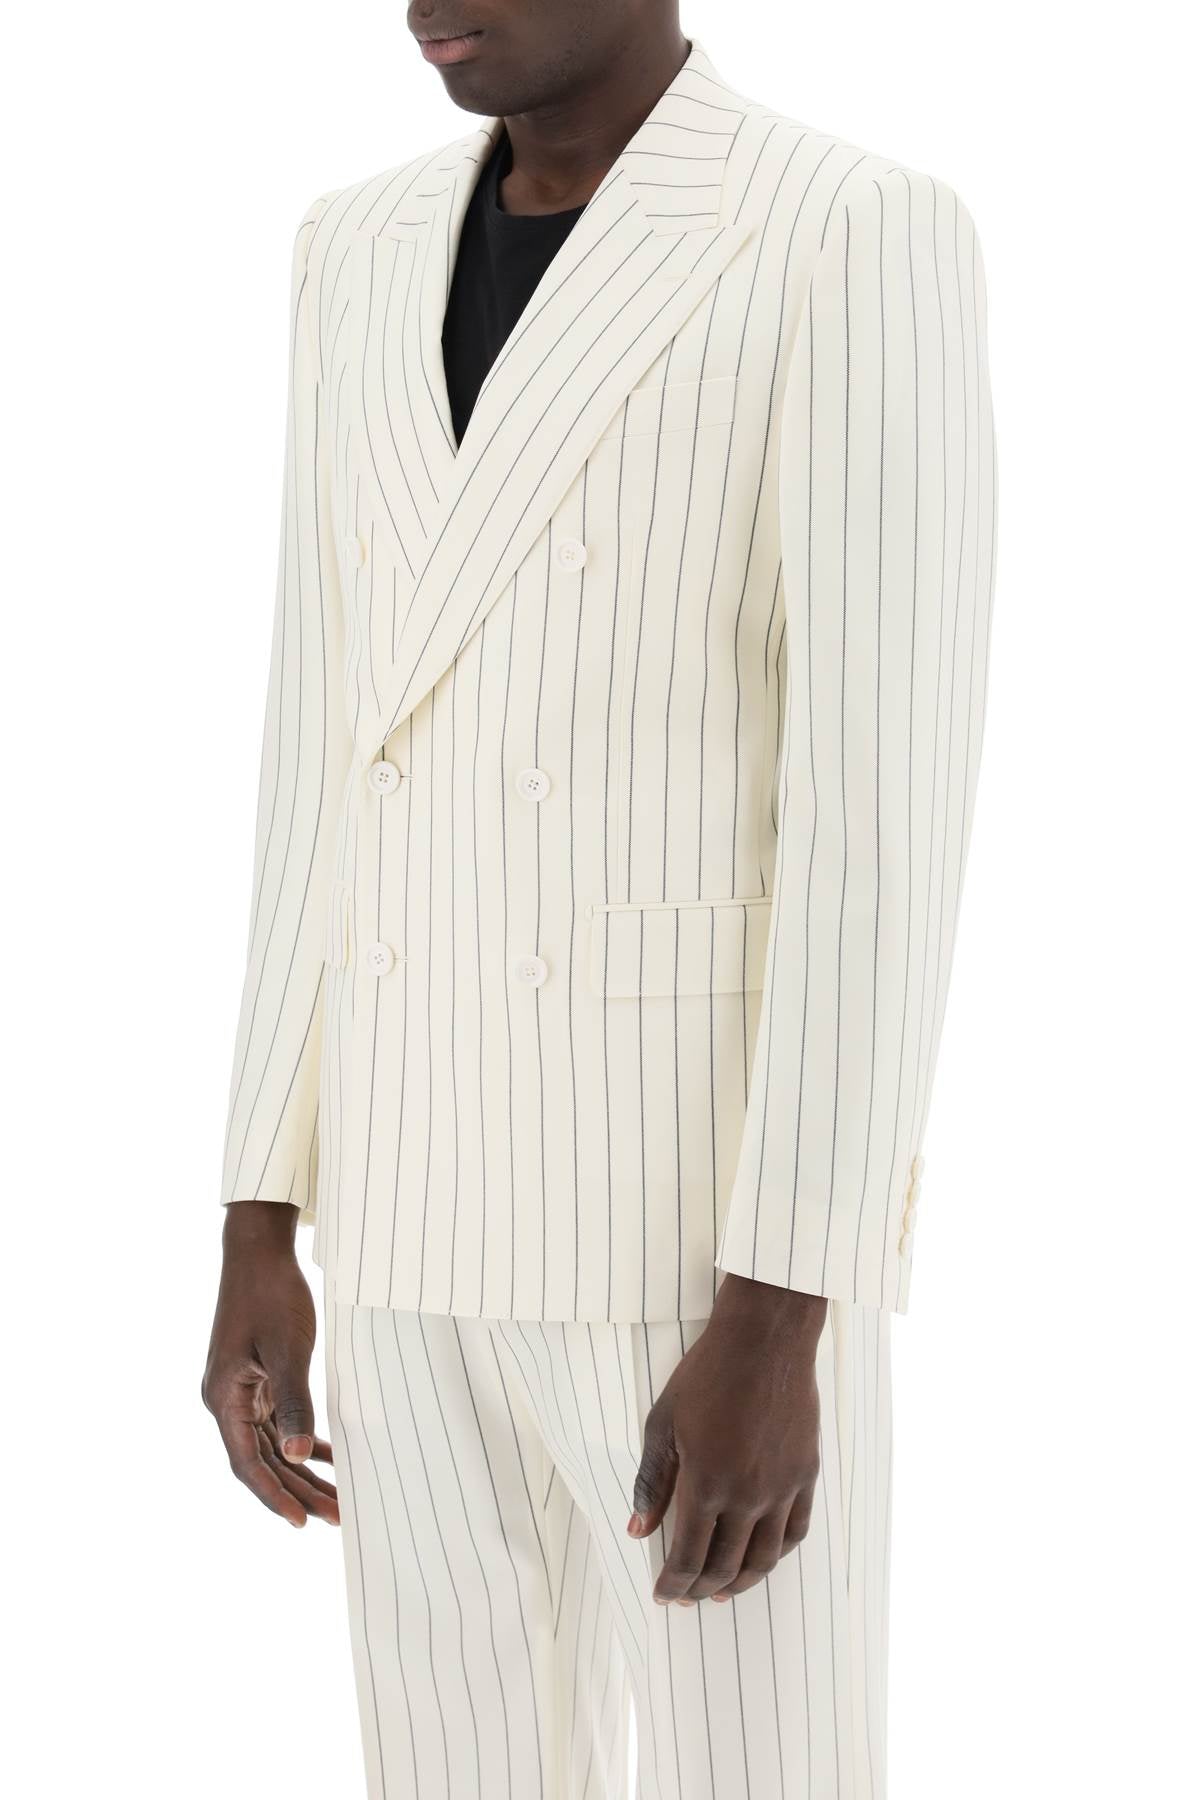 Dolce & Gabbana Double Breasted Pinstripe   White